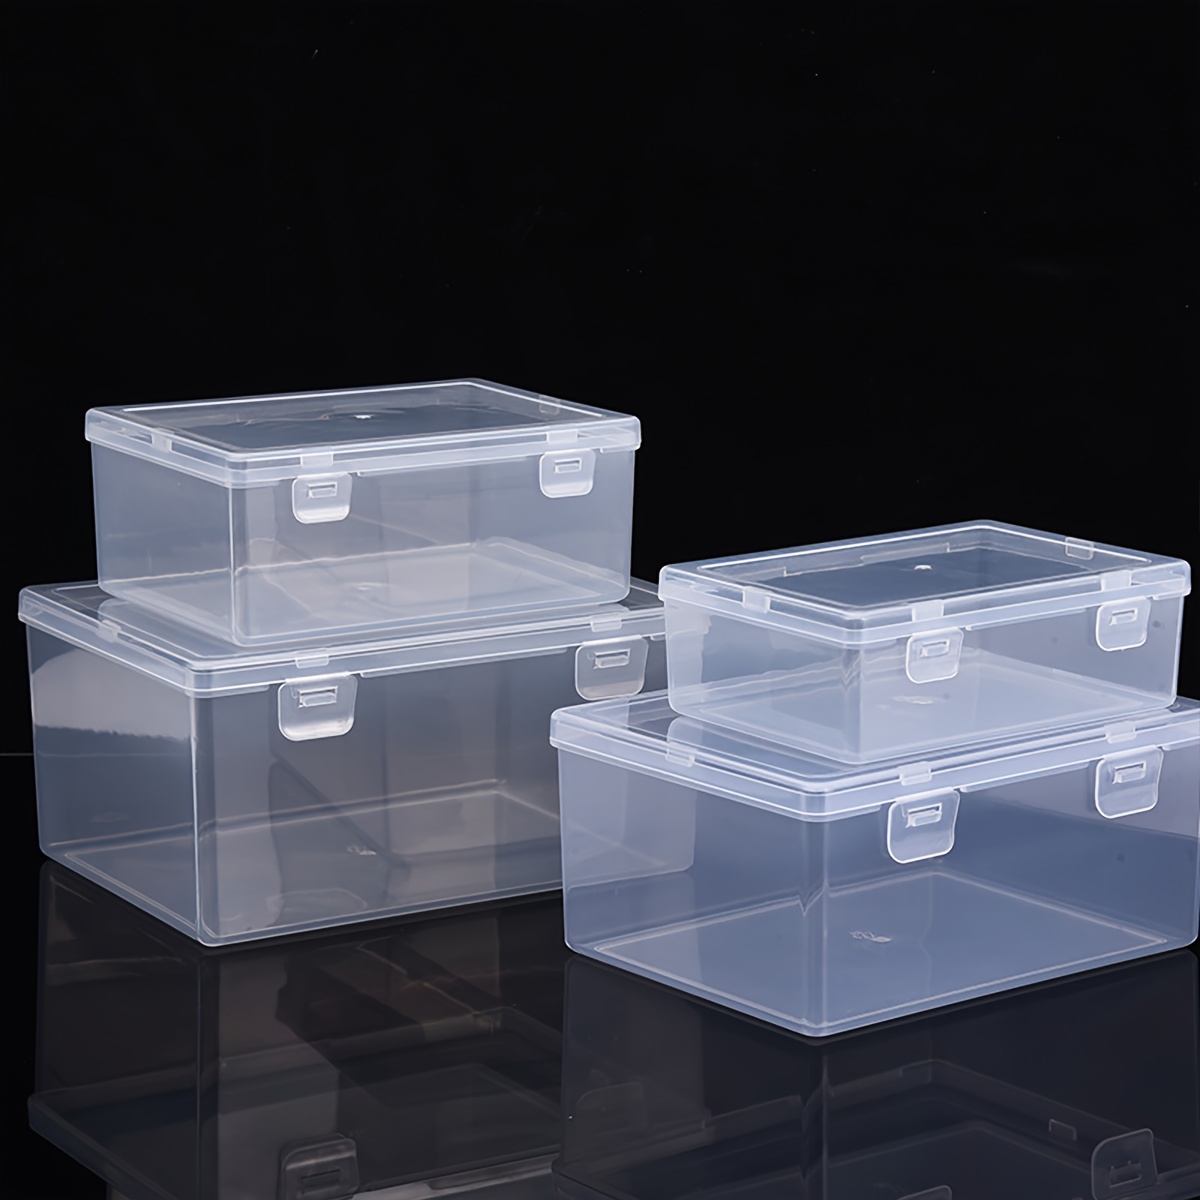 

Clear Plastic Storage Boxes Set: 1 Large And 3 Smaller Sizes, Perfect For Organizing Office Supplies, Crafts, Or Electronics